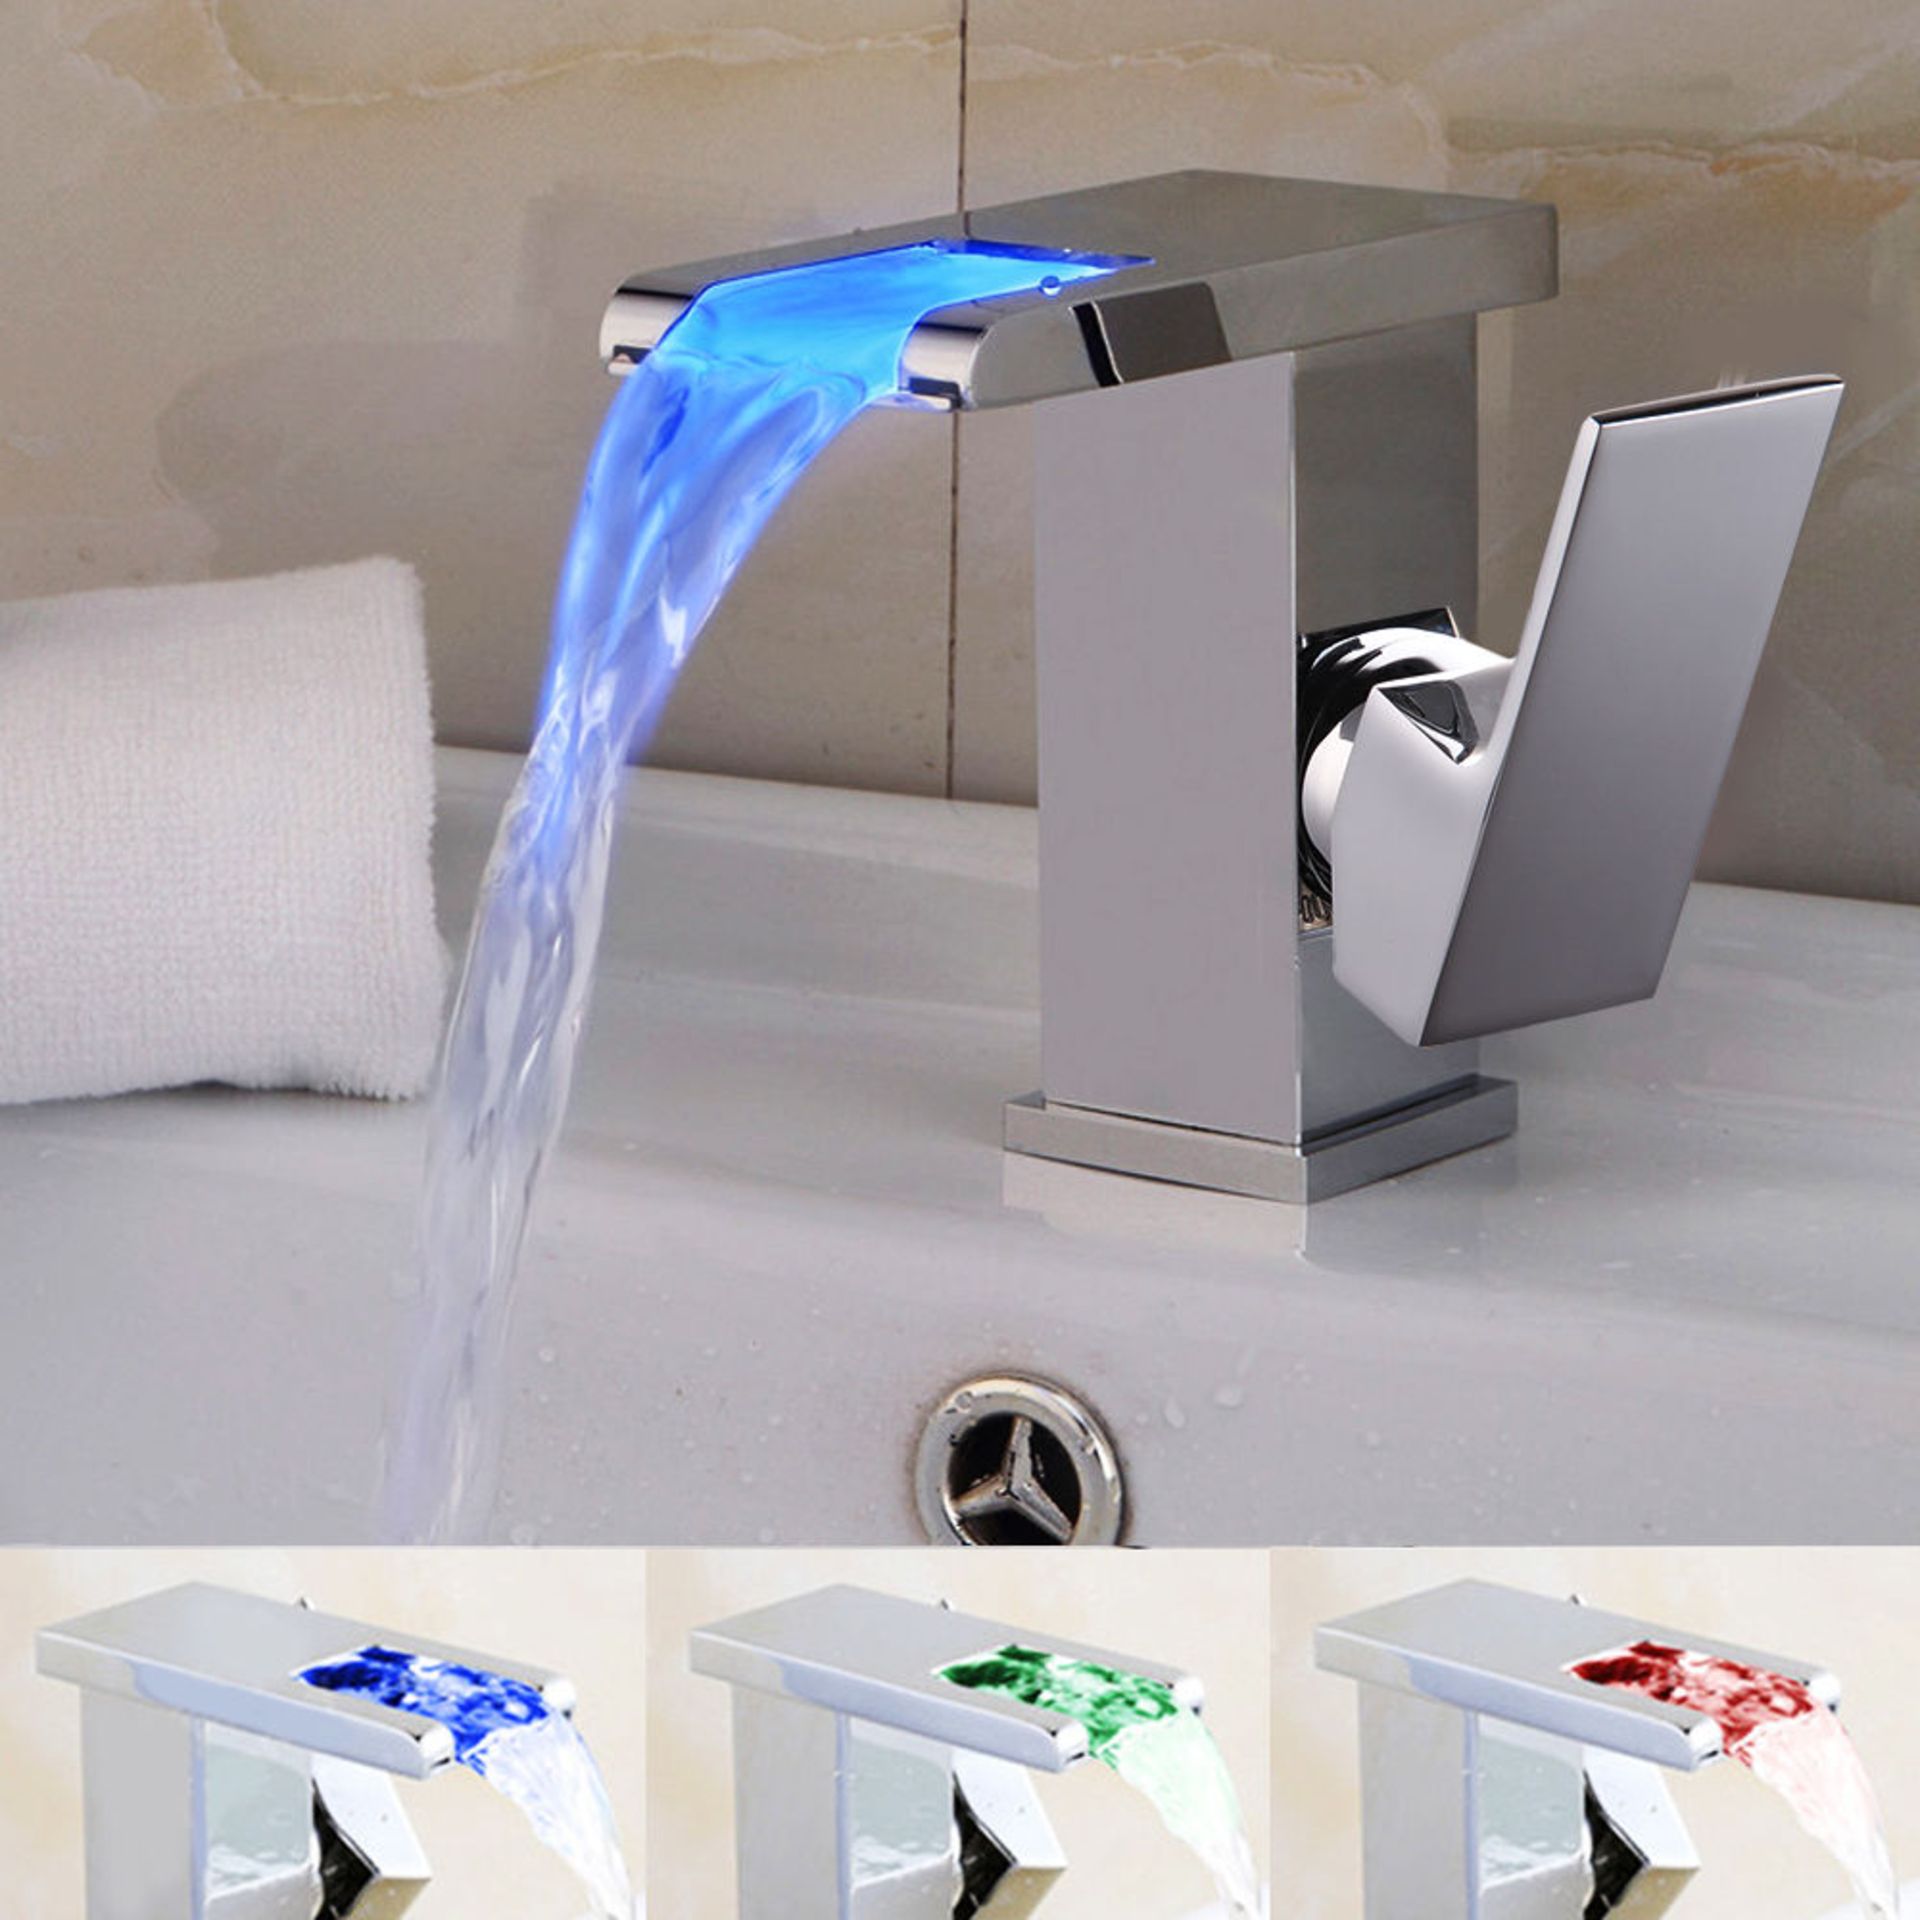 (M162) LED Waterfall Bathroom Basin Mixer Tap. RRP £229.99. Easy to install and clean. All copper